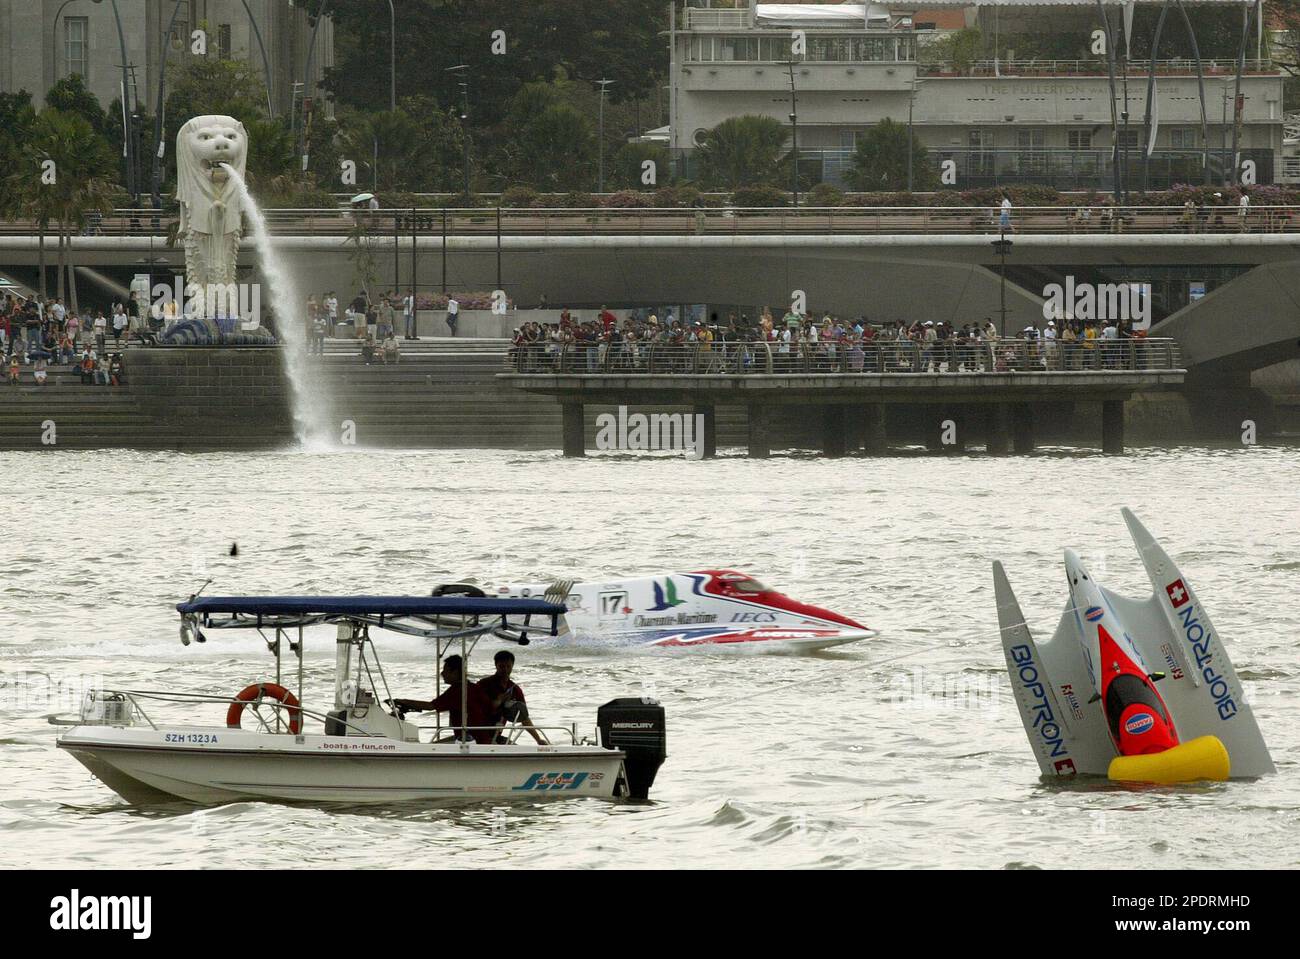 Tamoil F1 Racing Team's boat pilotted by former Italian World Champion  Cappellini Guido is seen capsized after a crash at the second bend while  Dessertenne Phillipe from France blasts past Sunday Sept.